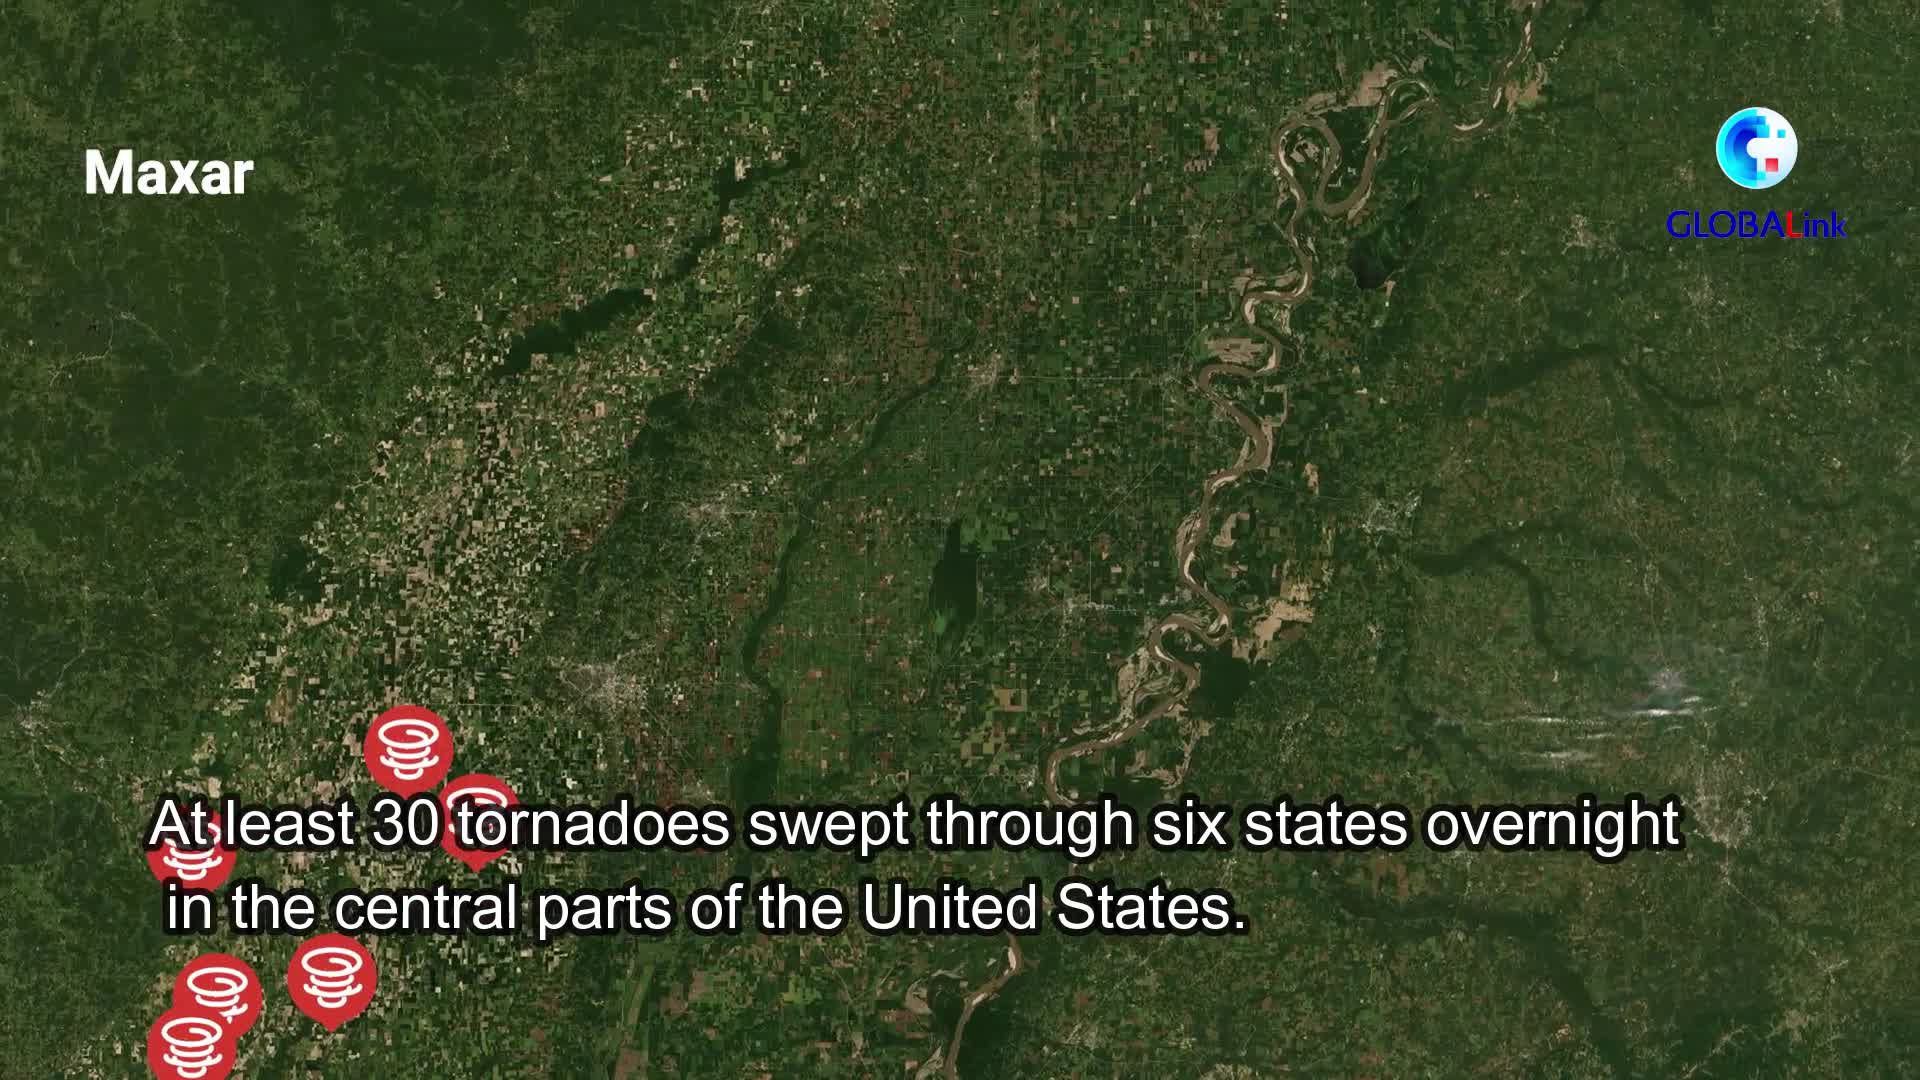 GLOBALink | Damage from deadly tornadoes in U.S. revealed in satellite images